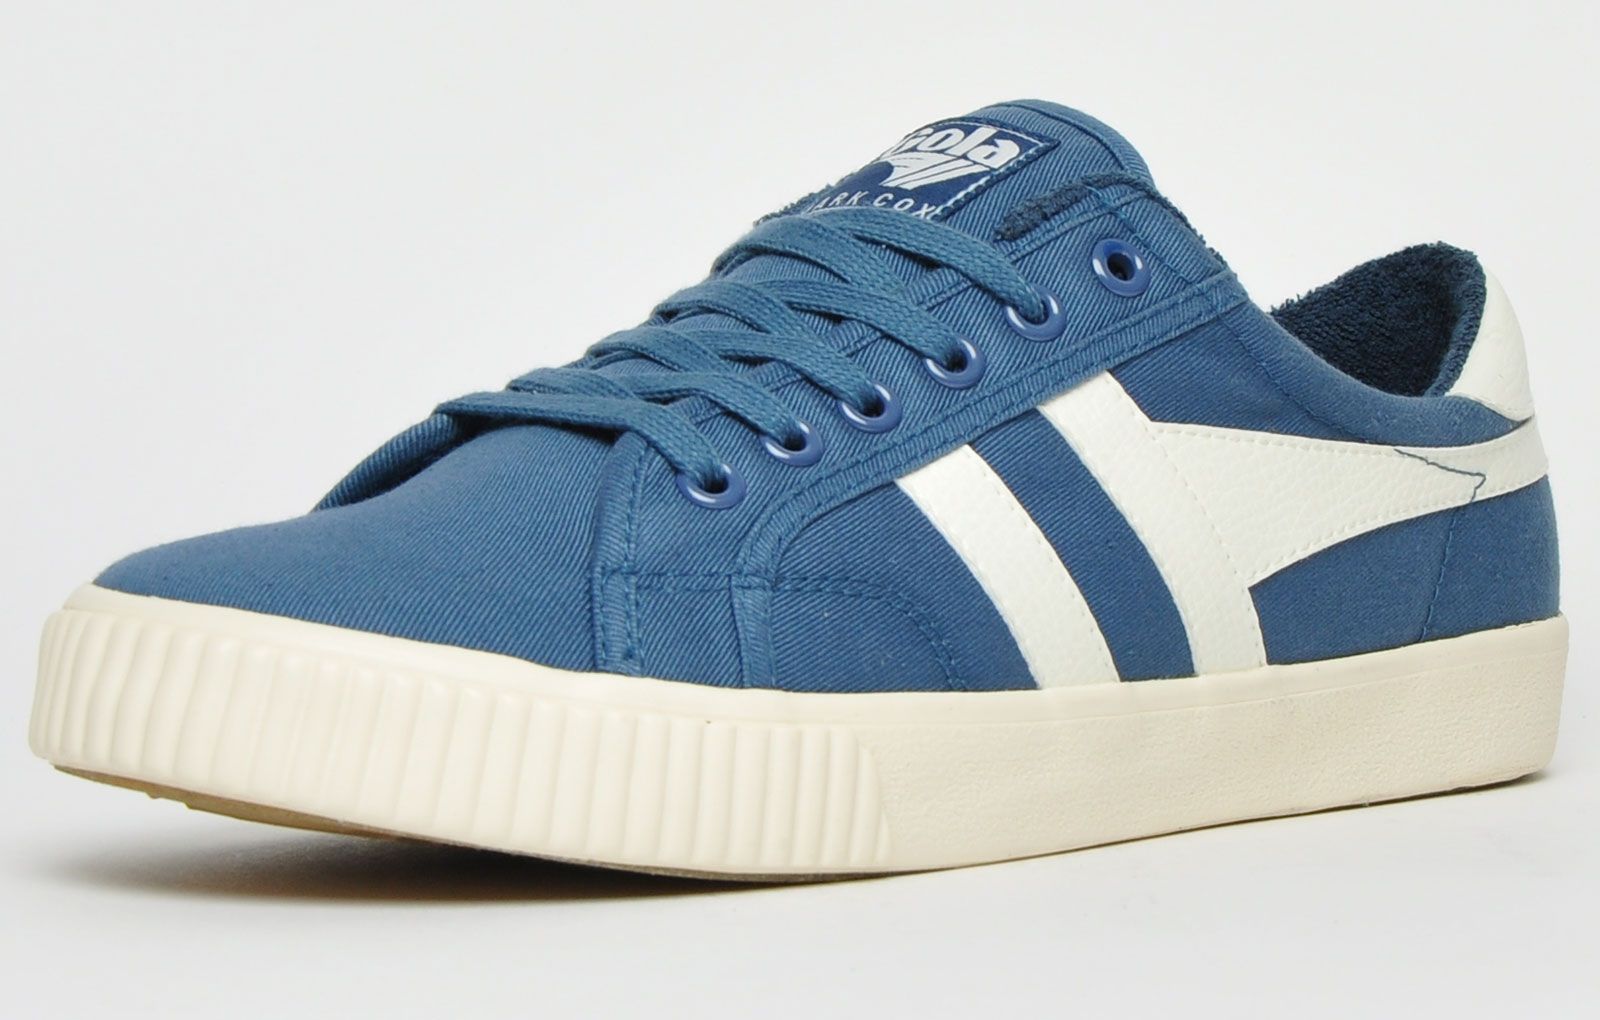 The Gola Classics Tennis Mark Cox is an update of the original Gola Tennis shoe design from 1973. Featuring a Baltic blue canvas textile upper with contrasting Gola branding and a sleek vintage styled sole to give a clean and fresh look. Offering enhanced comfort with a padded soft brushed lining and padded insole, its versatile style can be teamed with a variety of looks to add a relaxed touch to any outfit. <p>- Retro style trainers</p> <p>- Vegan Friendly</p> <p>- Soft lining for additional comfort</p> <p> - Premium canvas textile upper</p> <p>- Lace-up closure</p> <p>- Gola Classics branding throughout</p>